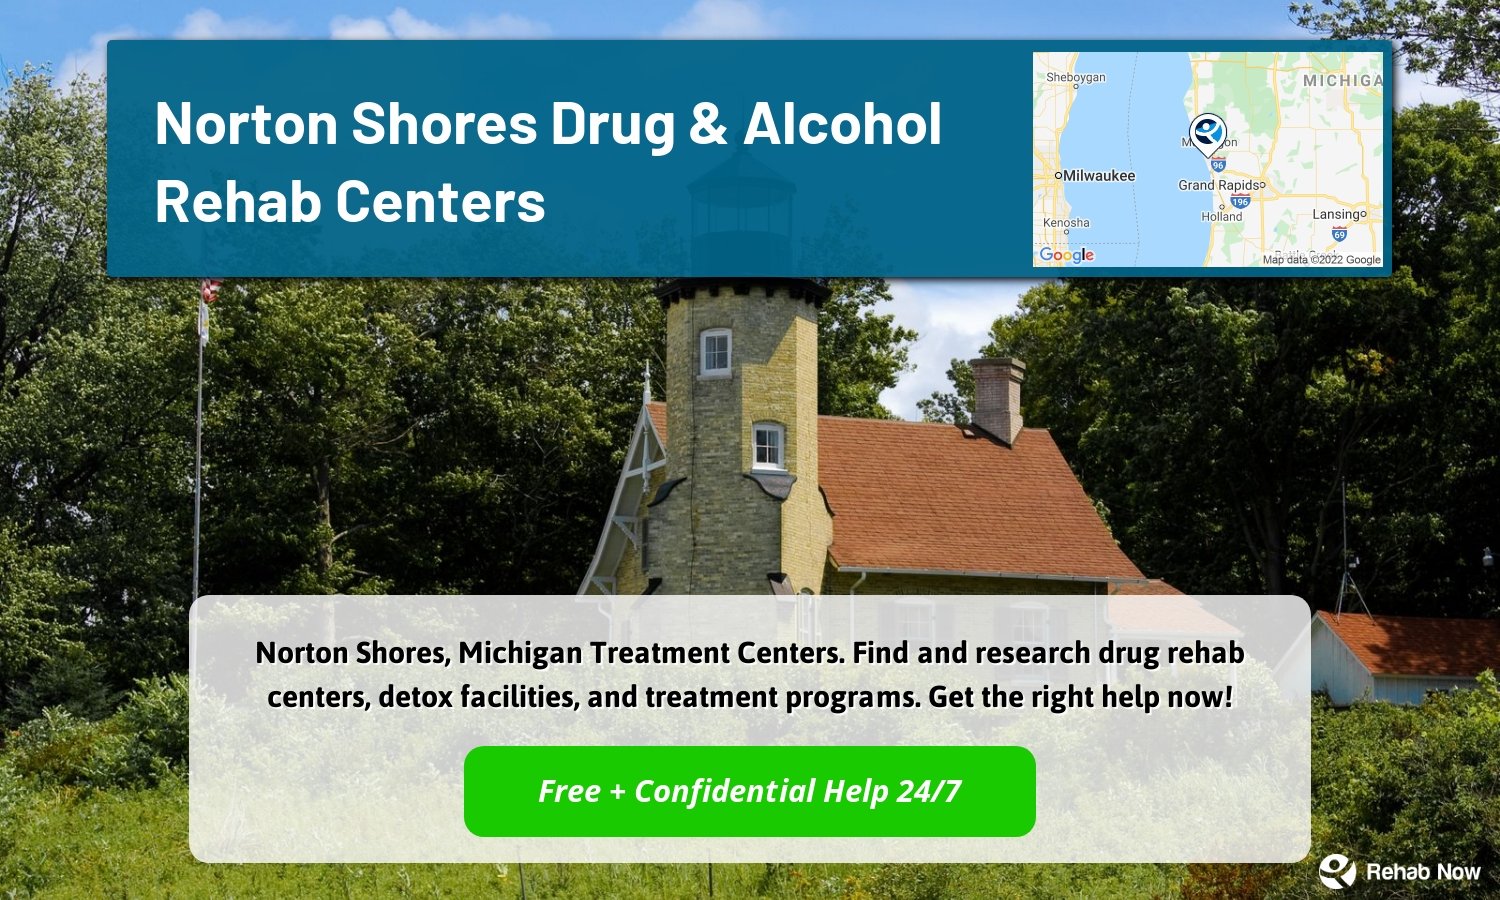 Norton Shores, Michigan Treatment Centers. Find and research drug rehab centers, detox facilities, and treatment programs. Get the right help now!